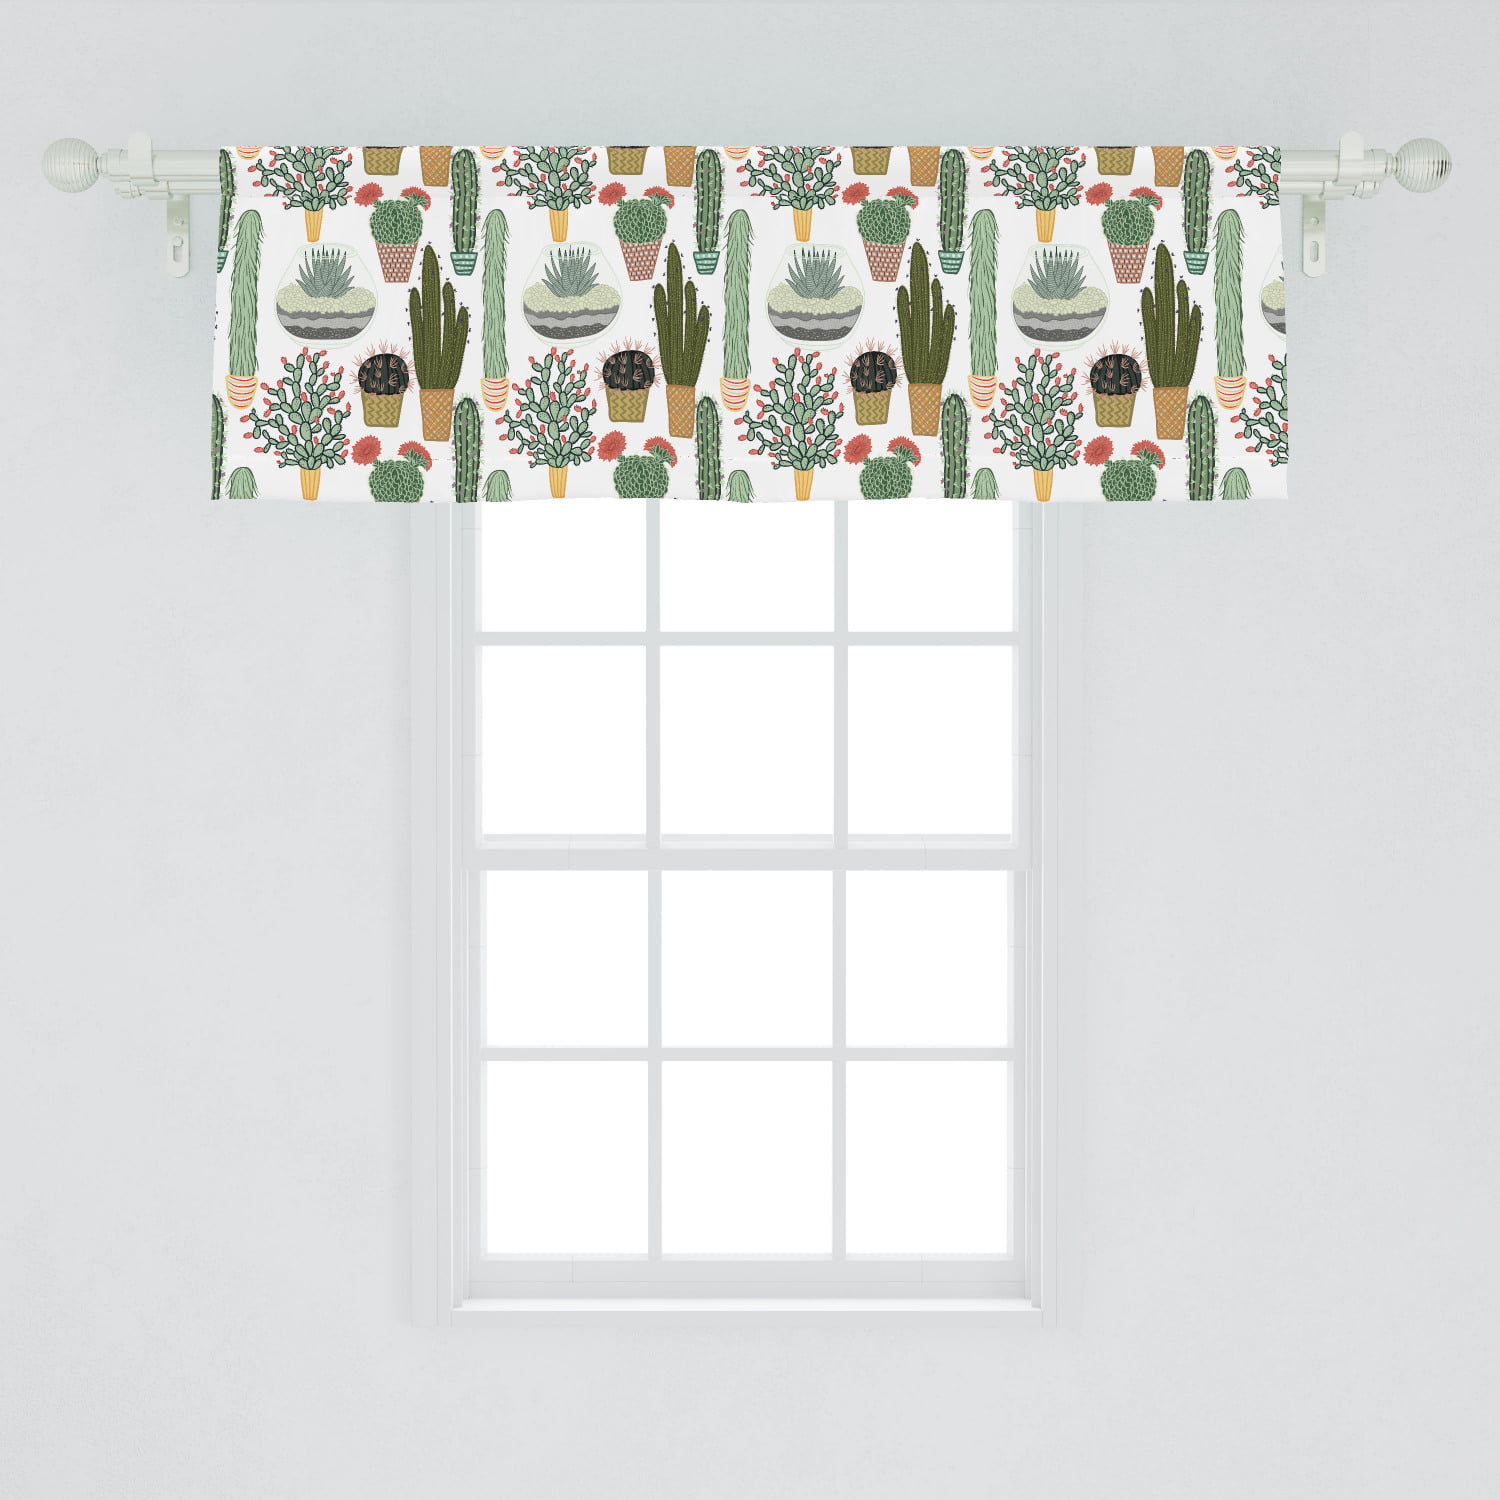 Cactus Window Valance, Pattern with Succulent Plants and Cactuses in ...